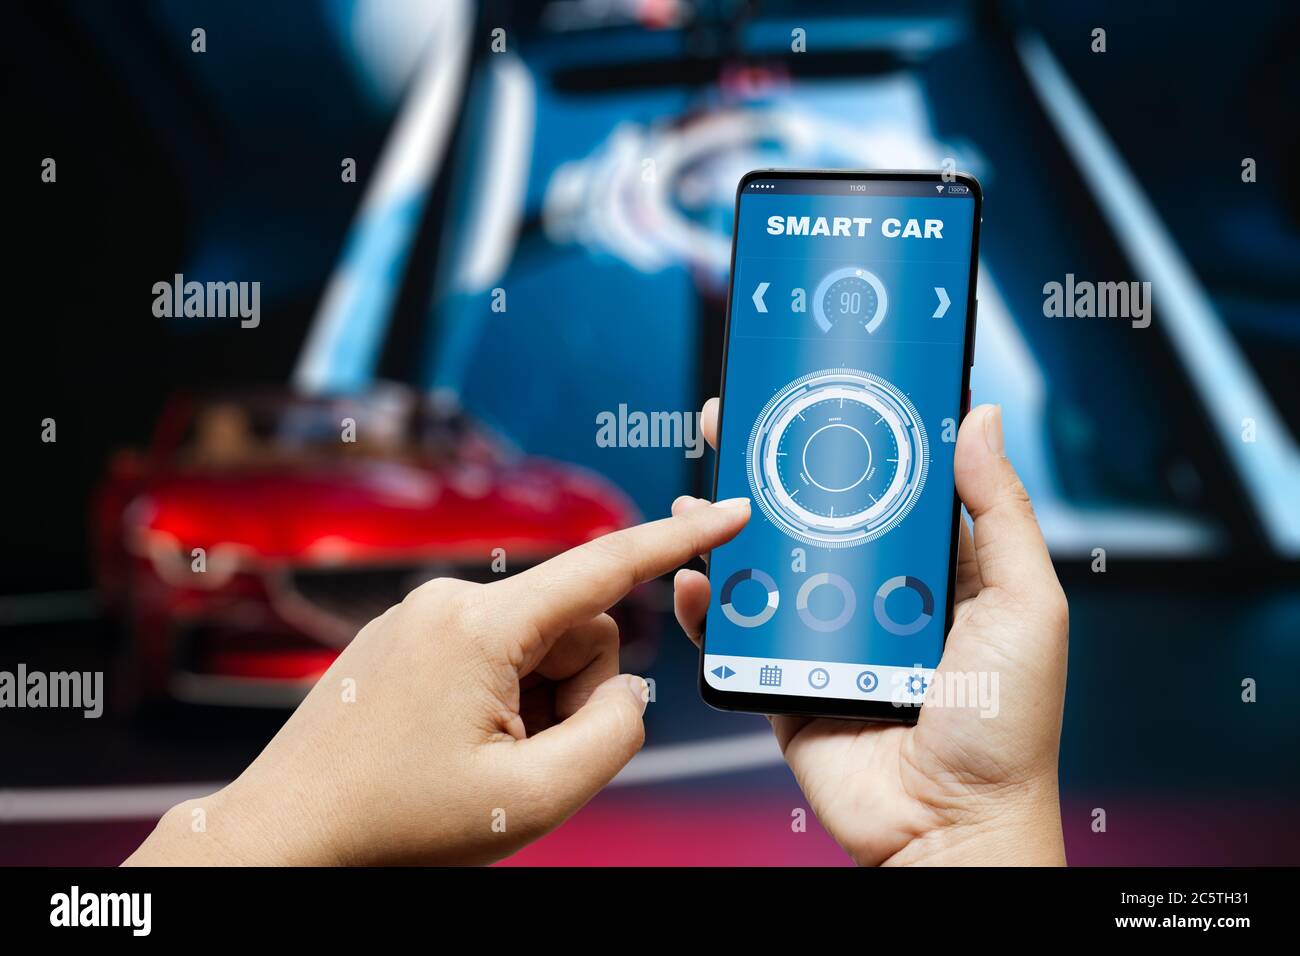 Smart car appliction background concept. Hand holding smart phone and application dashboard with blurred sport car as background. Internet of things I Stock Photo